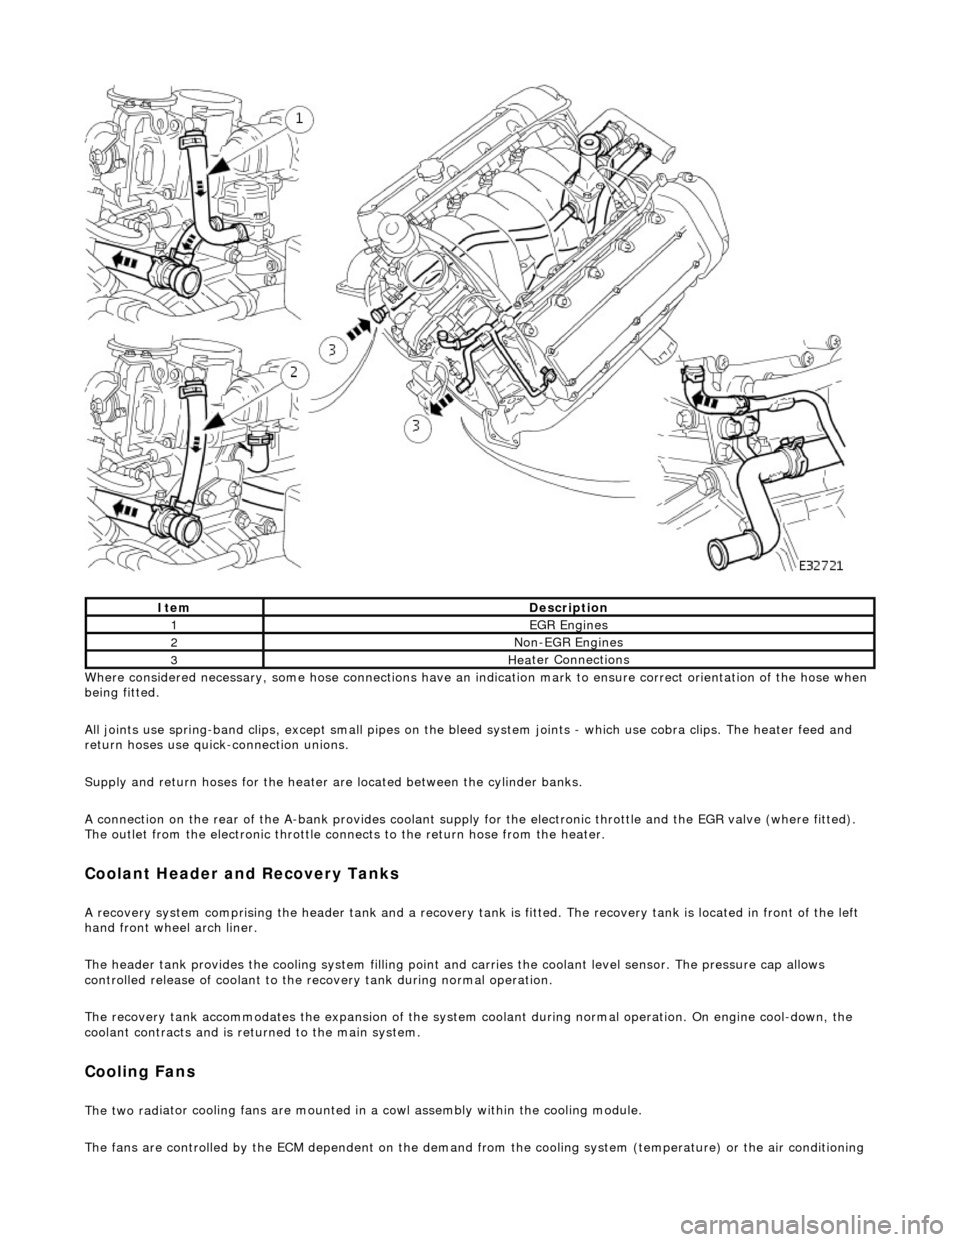 JAGUAR X308 1998 2.G Workshop Manual  
Whe r
 e considered necessary, some hose conn
ections have an indication mark to ensure correct orientation of the hose when 
being fitted. 
All joints use spring-band clips, except small pipes on t